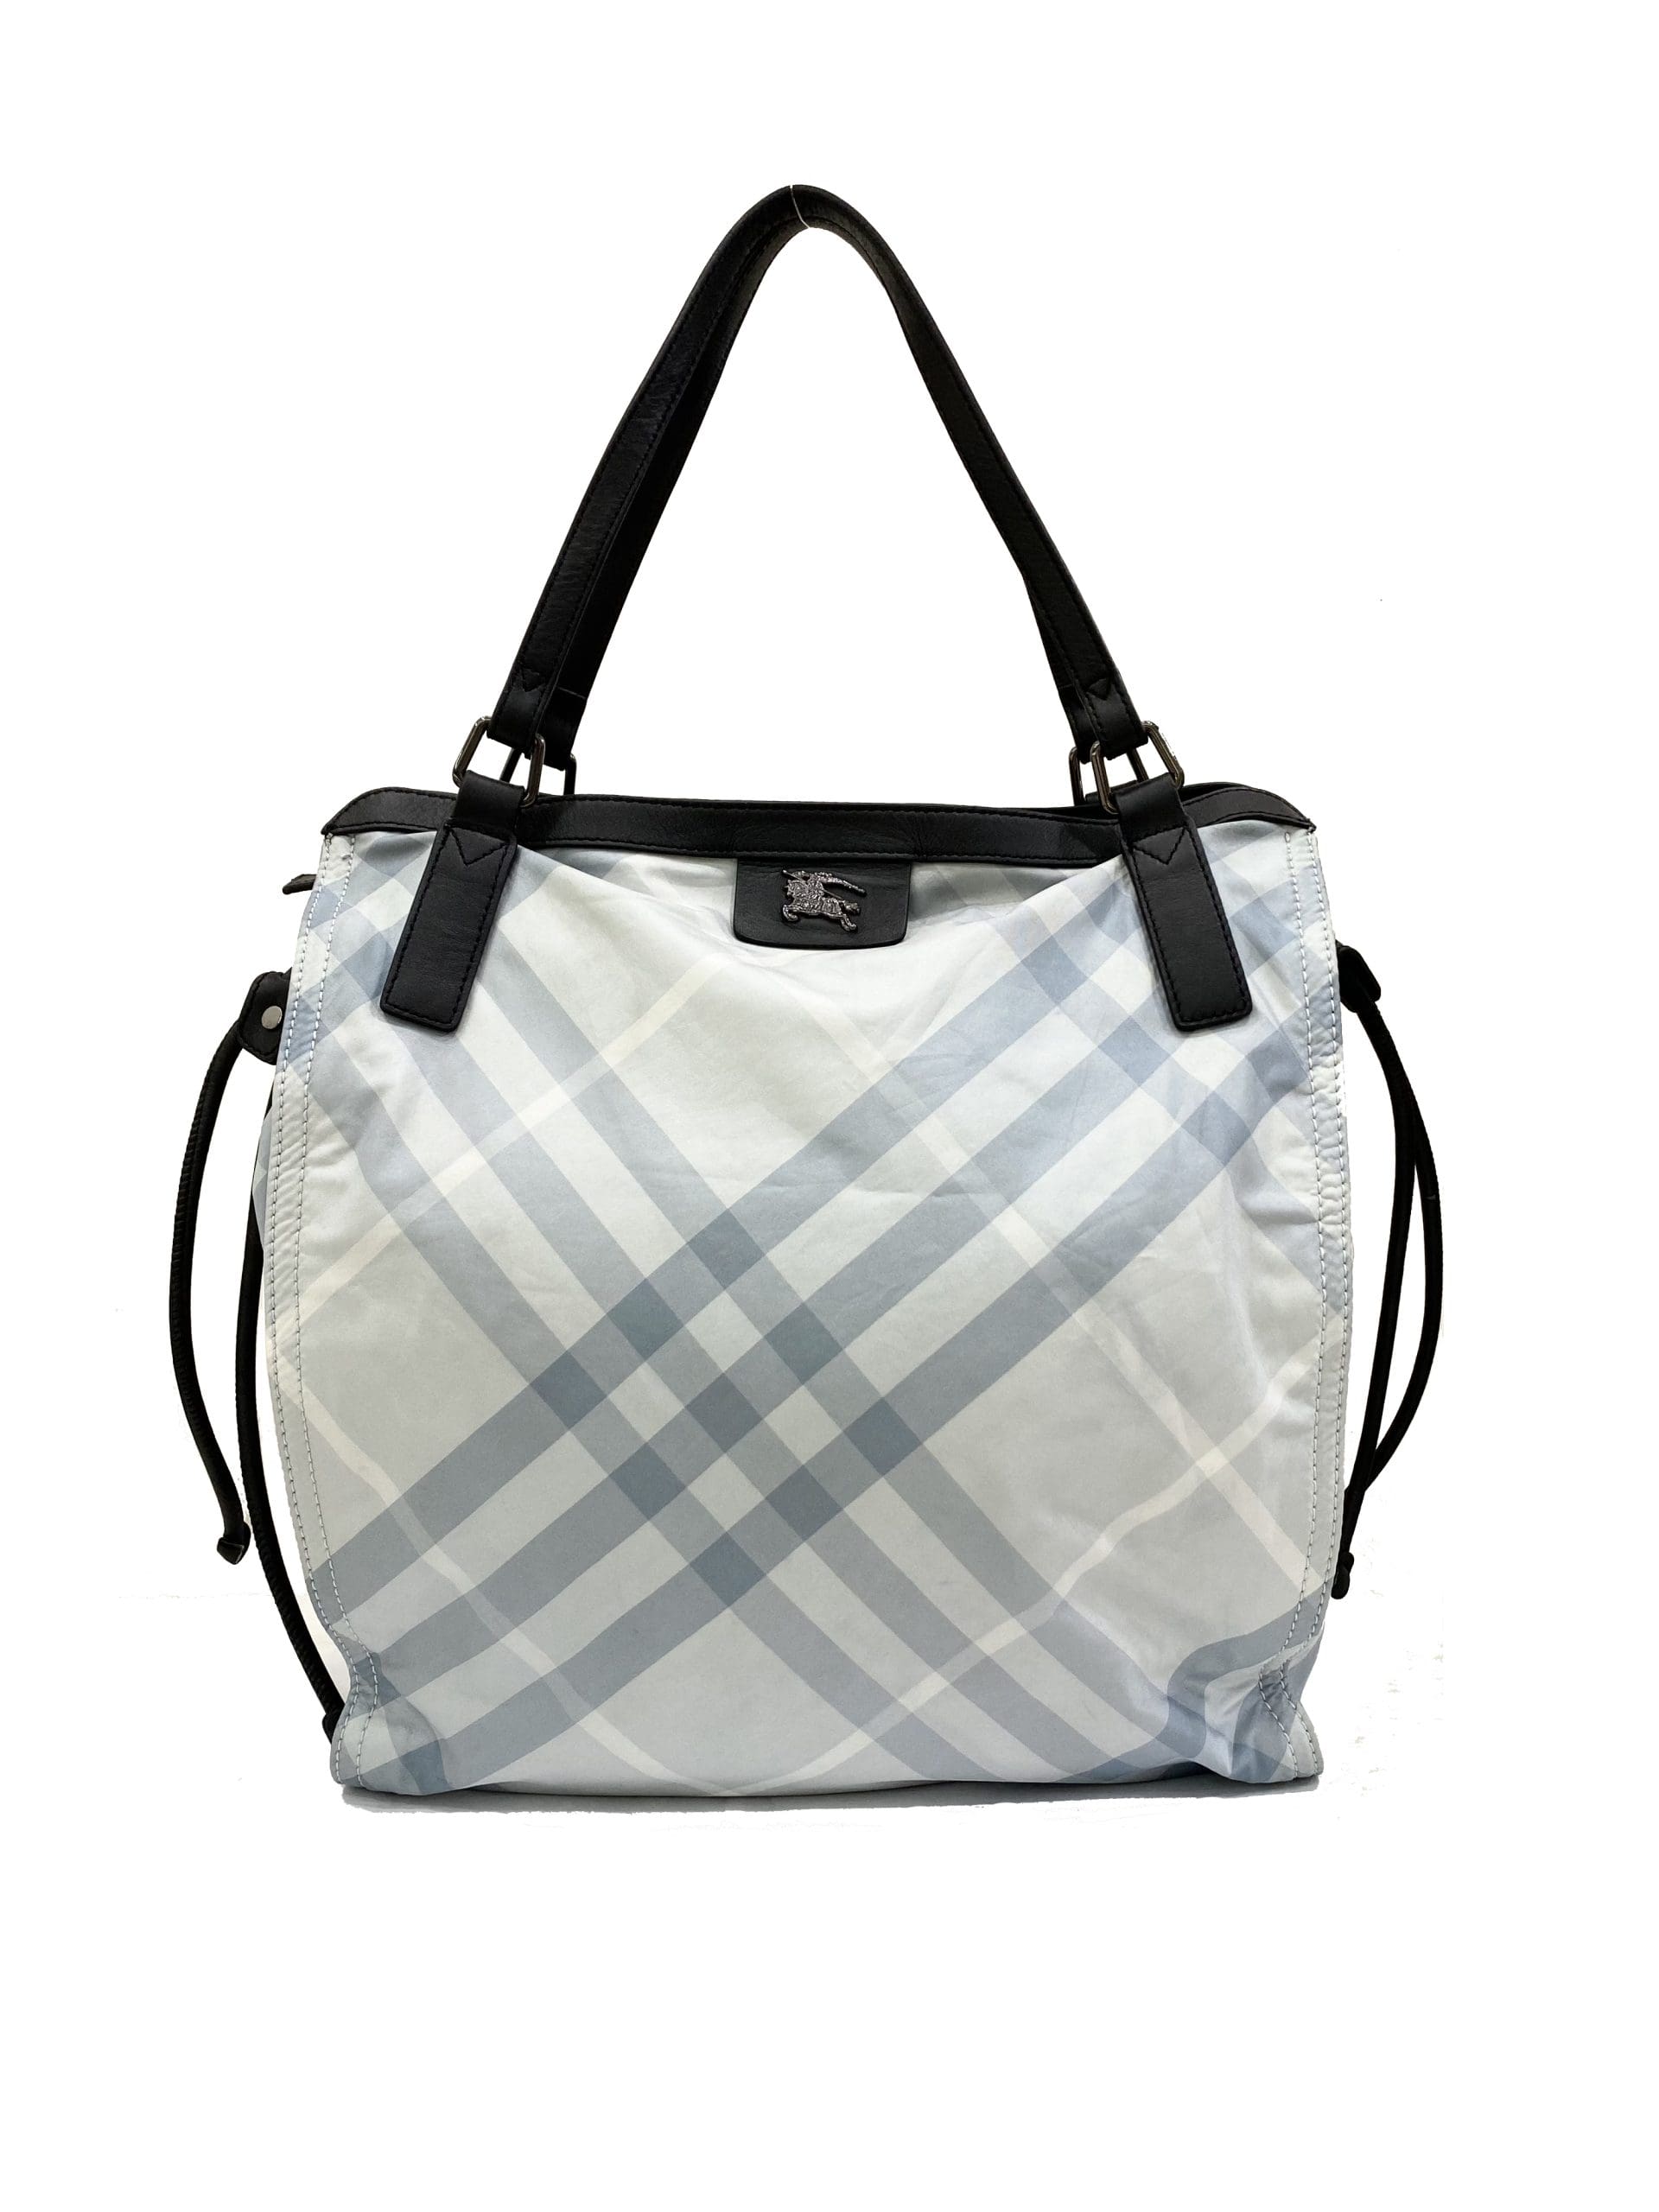 B&W Check Packable Tote